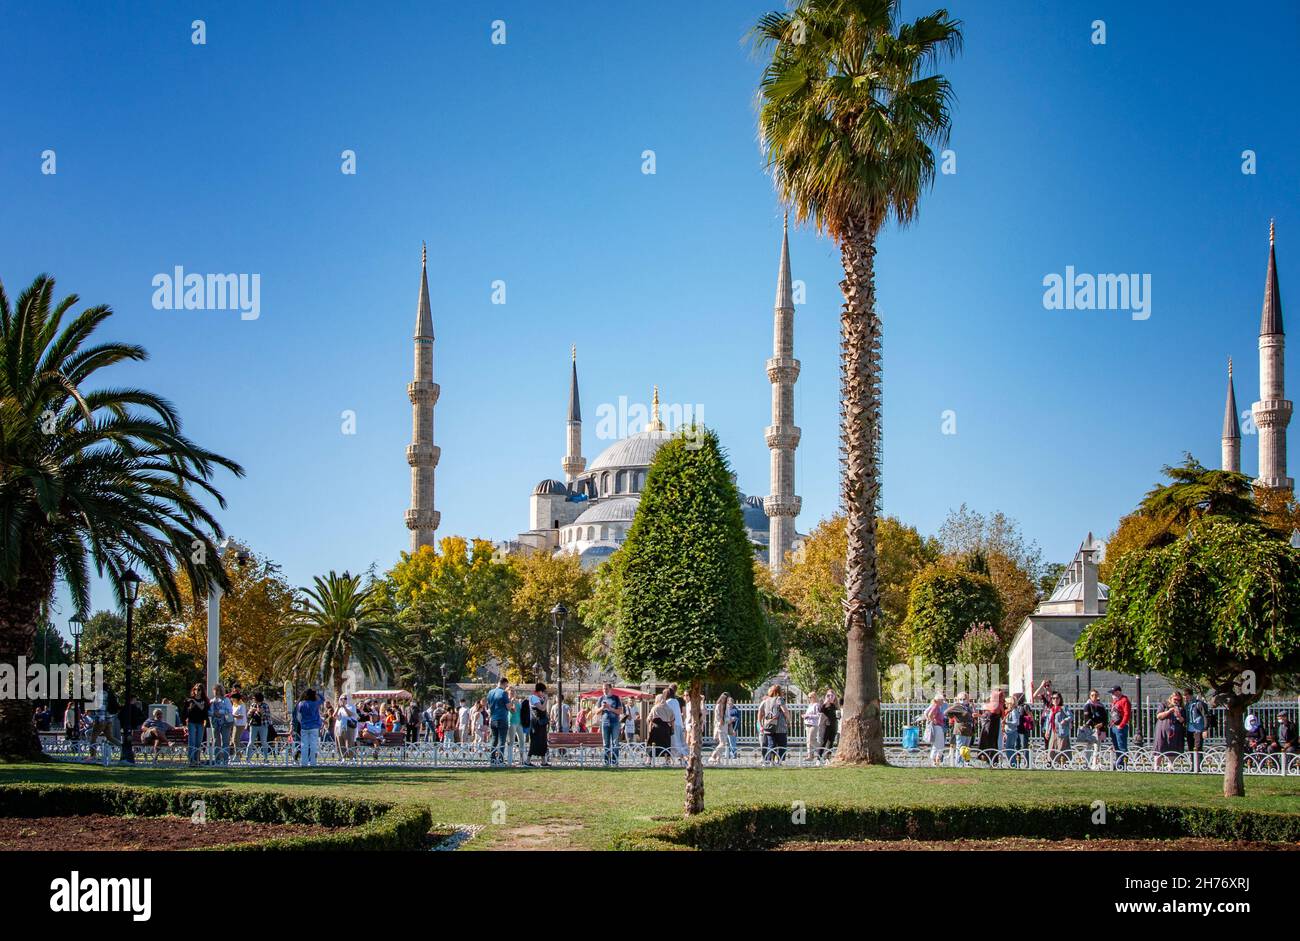 ISTANBUL, TURKEY. SEPTEMBER 26, 2021. Street view of the city Hagia Sophia mosque on the background. Daylight Stock Photo